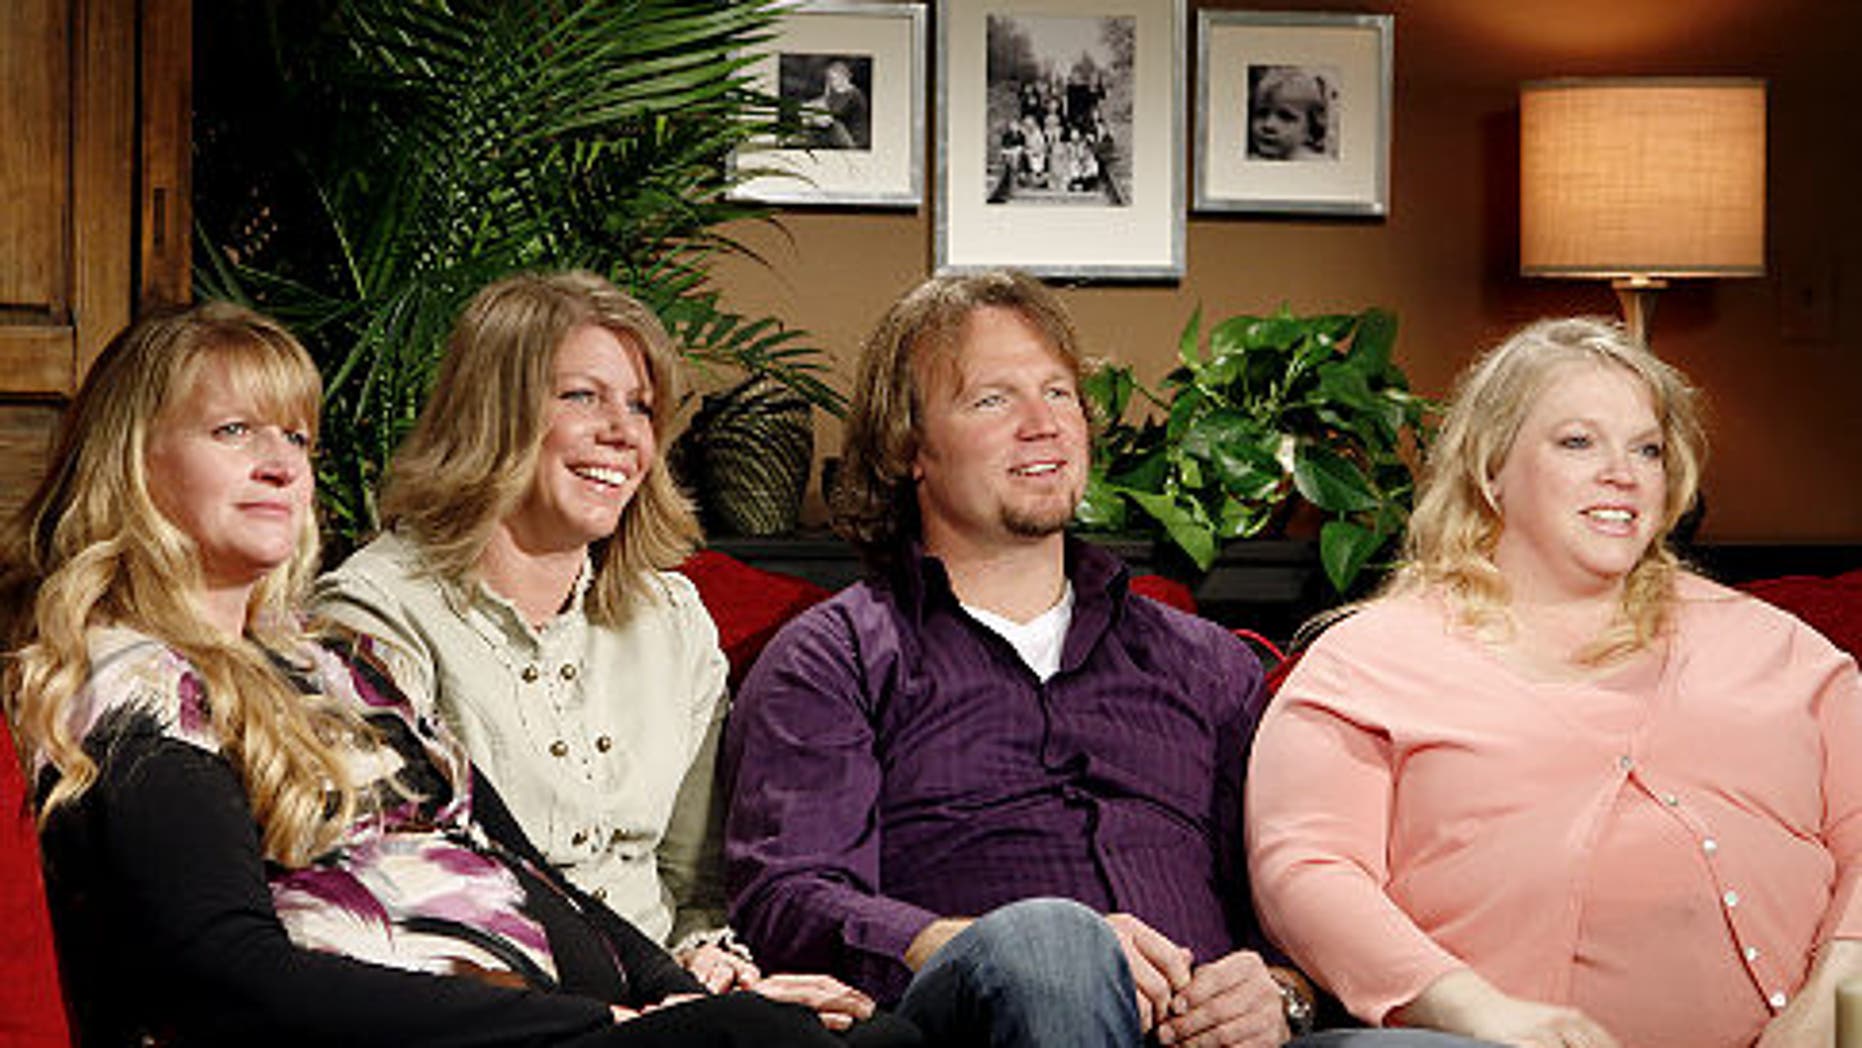 Sister Wives stars sue Utah, say polygamy ban is unconstitutional ...